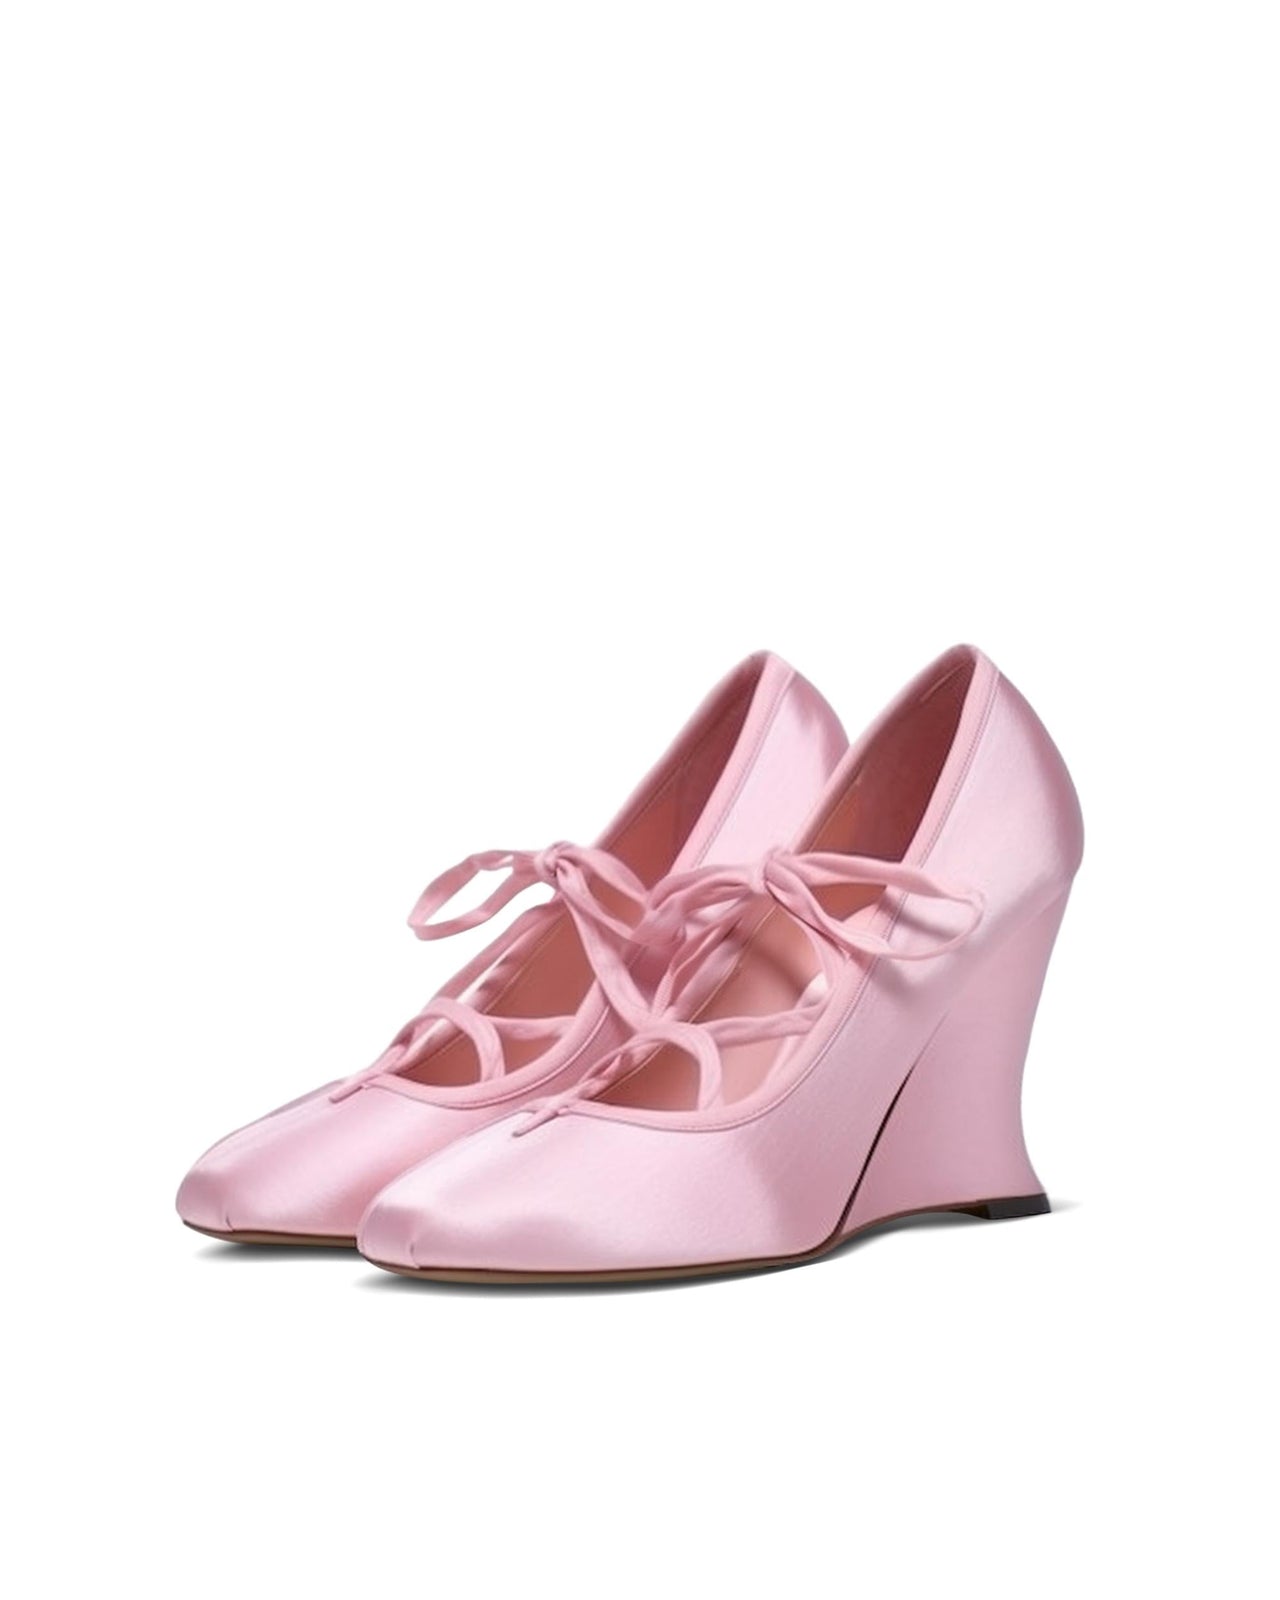 Satin Lace-up Wedge Pumps - Pink